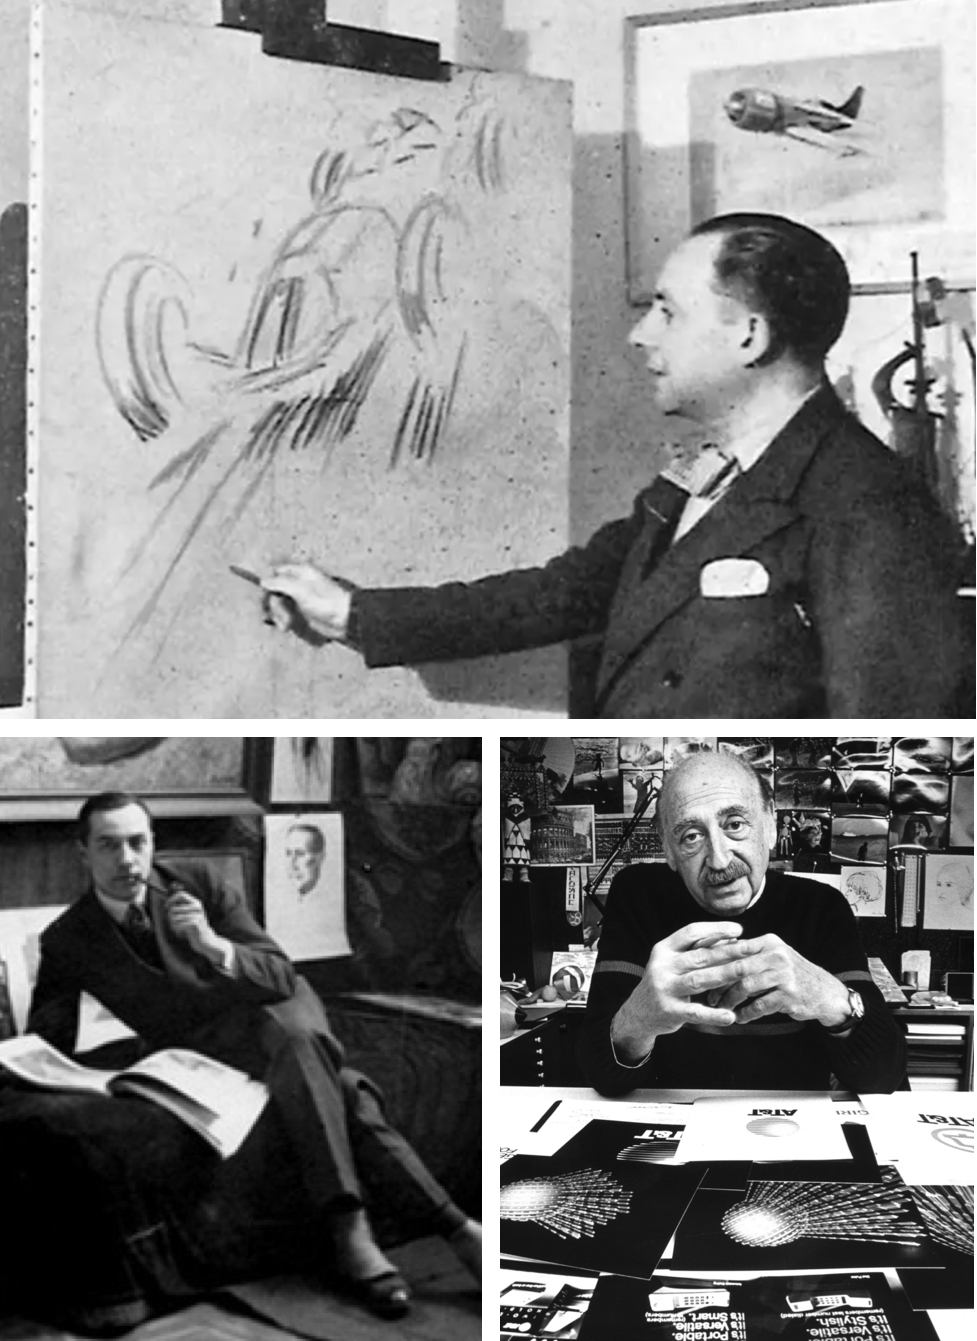 <strong>TRACK MASTERS </strong><br/><span>Clockwise from top: George Hamel, who signed his works Géo Ham; Saul Bass, the graphic designer, famous for his film-title sequences, including those for the early Bond films; and Roberto Falcucci, who created a robustly expressive Art Deco style. </span>